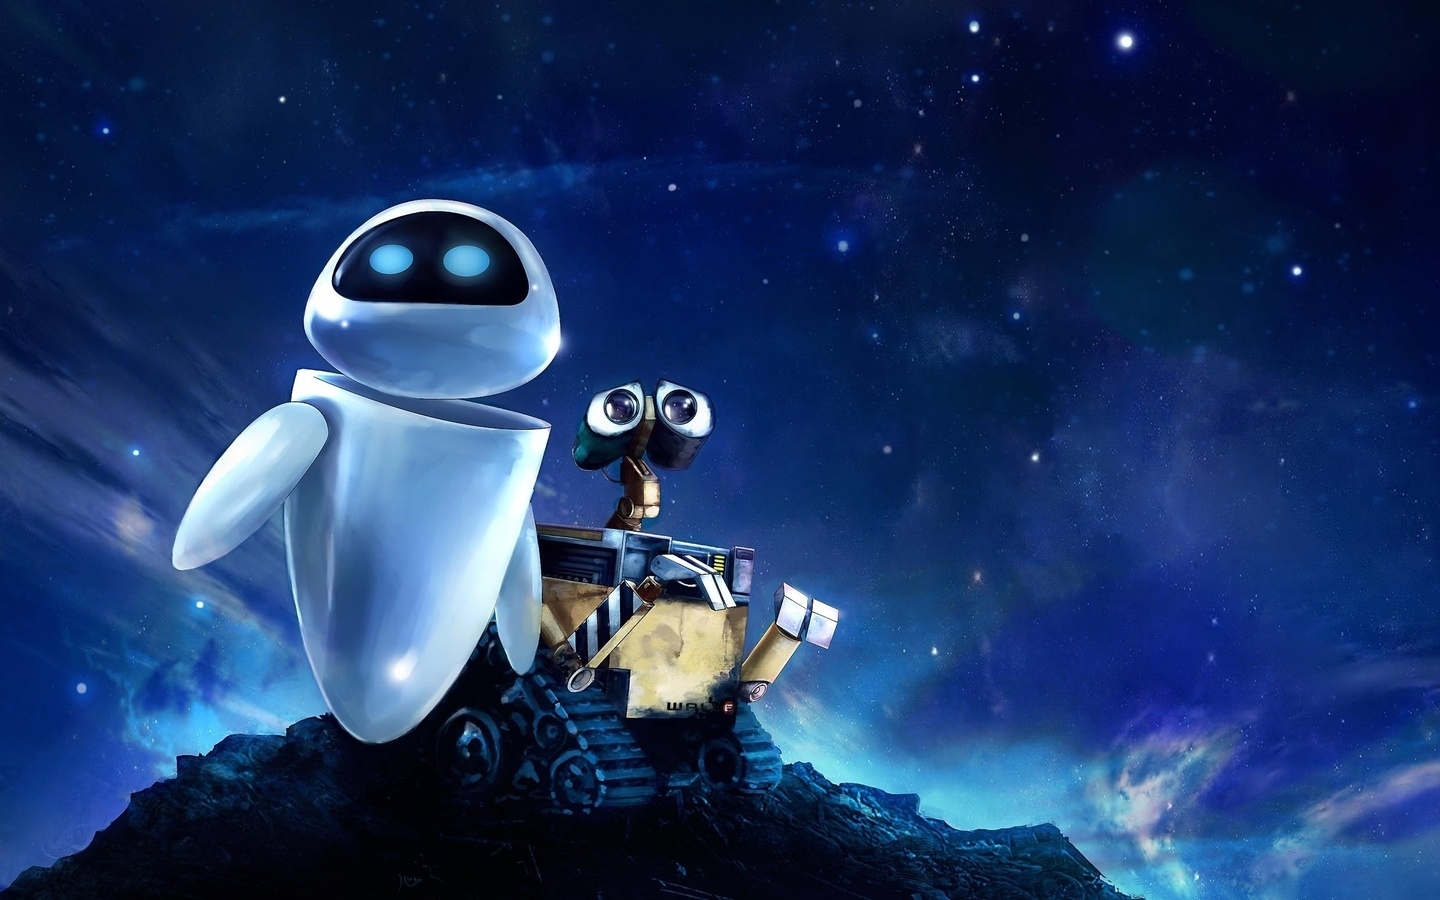 High Definition Wall-E background